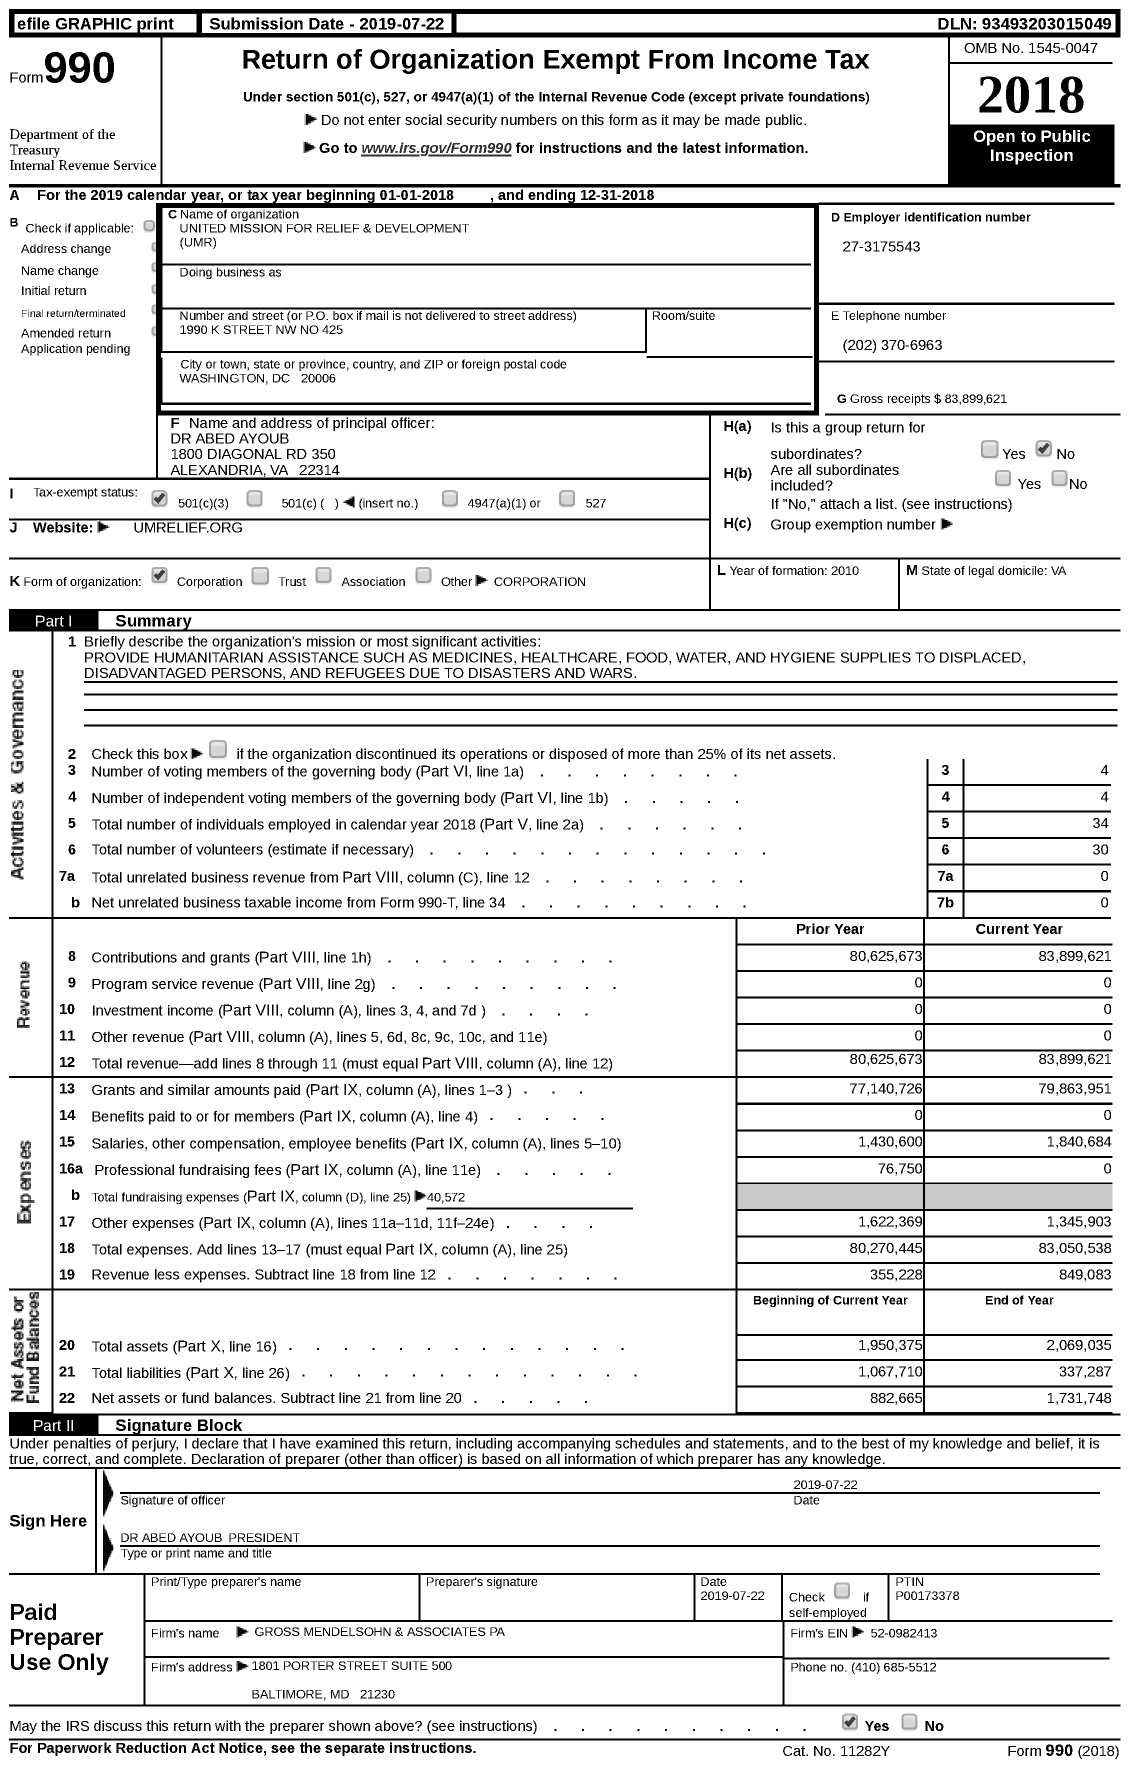 Image of first page of 2018 Form 990 for United Mission For Relief & Development (UMR)